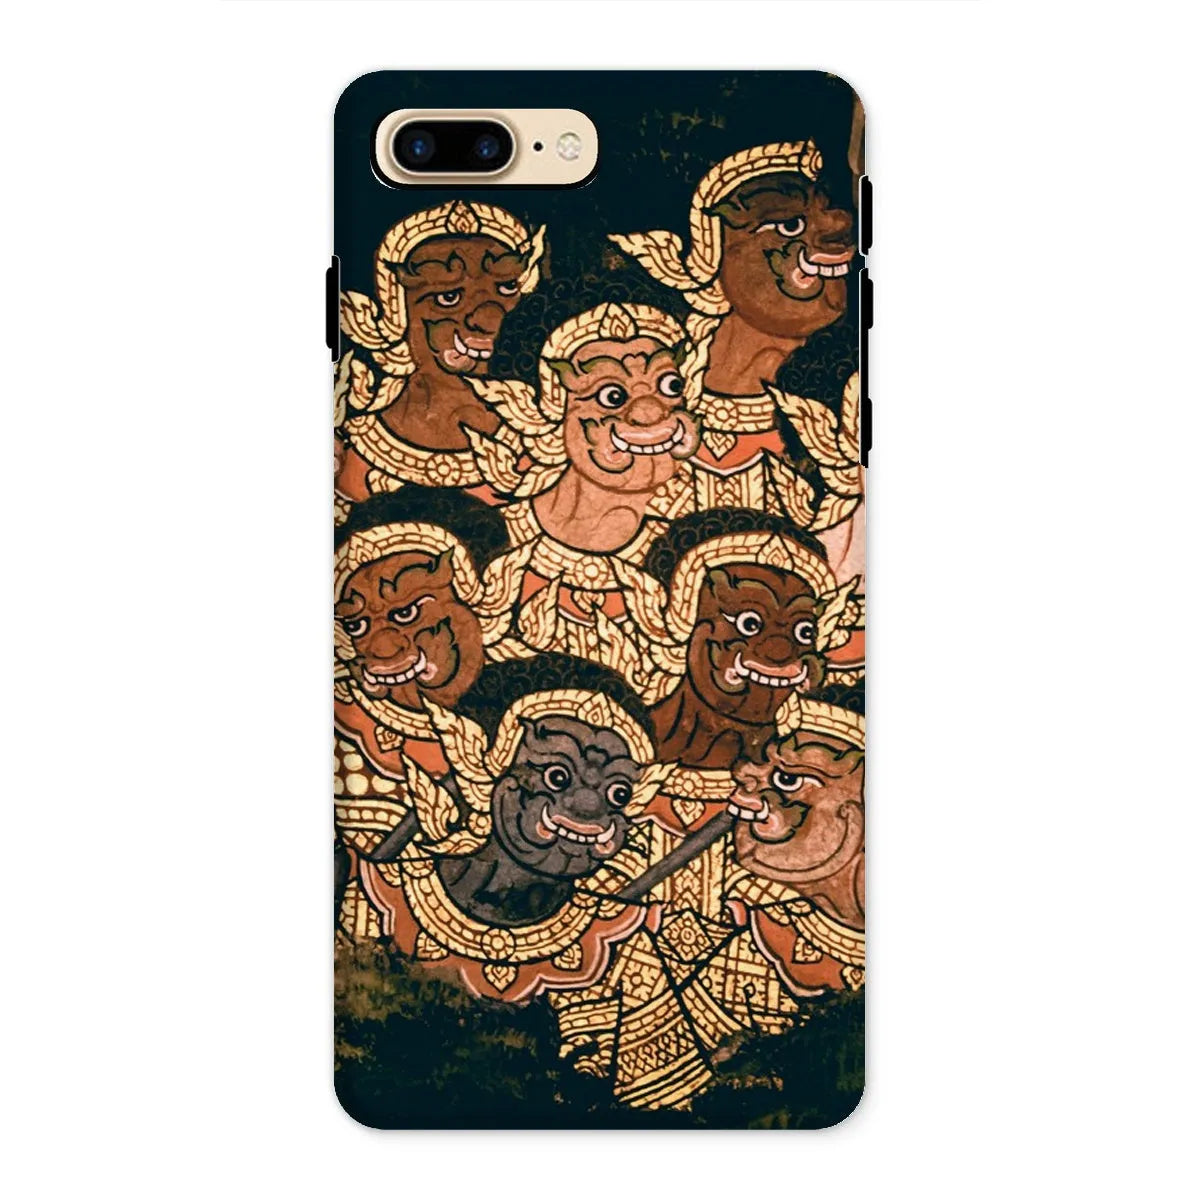 Babes In The Woods - Thailand Aesthetic Art Phone Case - Iphone 8 Plus / Matte - Mobile Phone Cases - Aesthetic Art